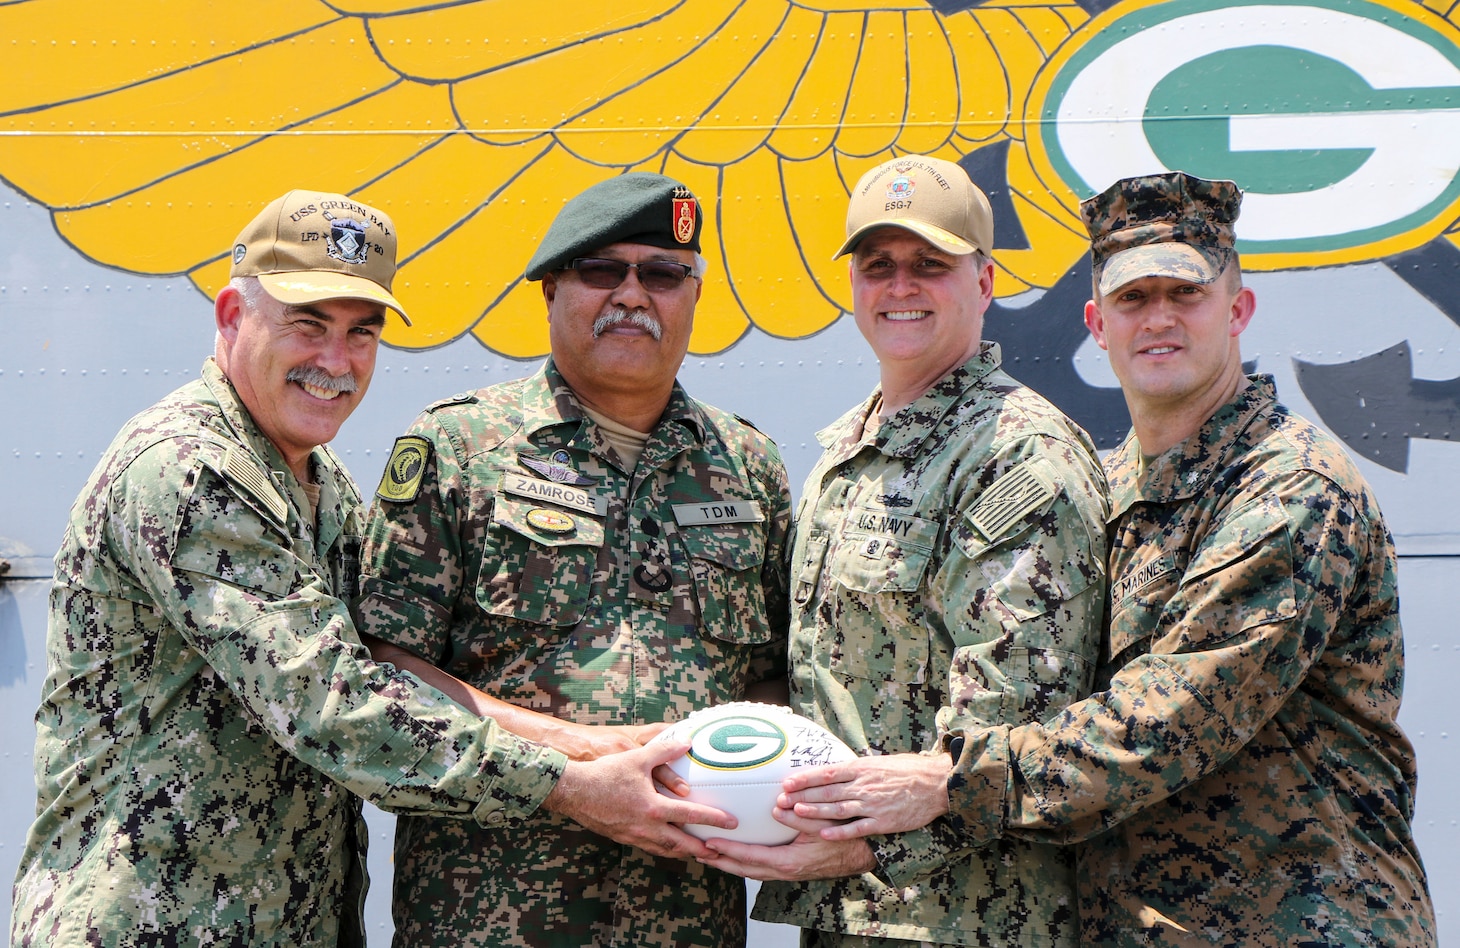 CELEBES SEA (Sept. 30, 2019) Captain Michael Harris, commanding officer of the amphibious transport dock ship USS Green Bay (LPD 20), Malaysian Armed Forces (MAF) Lt. Gen. Dato’ Wira Zambrose bin Mohd Zain, Army Field Eastern Commander, Rear Adm. Fred Kacher, commander of Expeditionary Strike Group 7, and Lt. Col. William Jacobs, commander of troops, 3rd Marine Division, pose for a photo with a Green Bay Packers football given as a memento during an opening ceremony for exercise Tiger Strike 2019. Tiger Strike focuses on strengthening combined U.S. and Malaysian military interoperability and increasing combat readiness through amphibious operations and cultural exchanges between the MAF and the U.S. Navy, Marine Corps team.